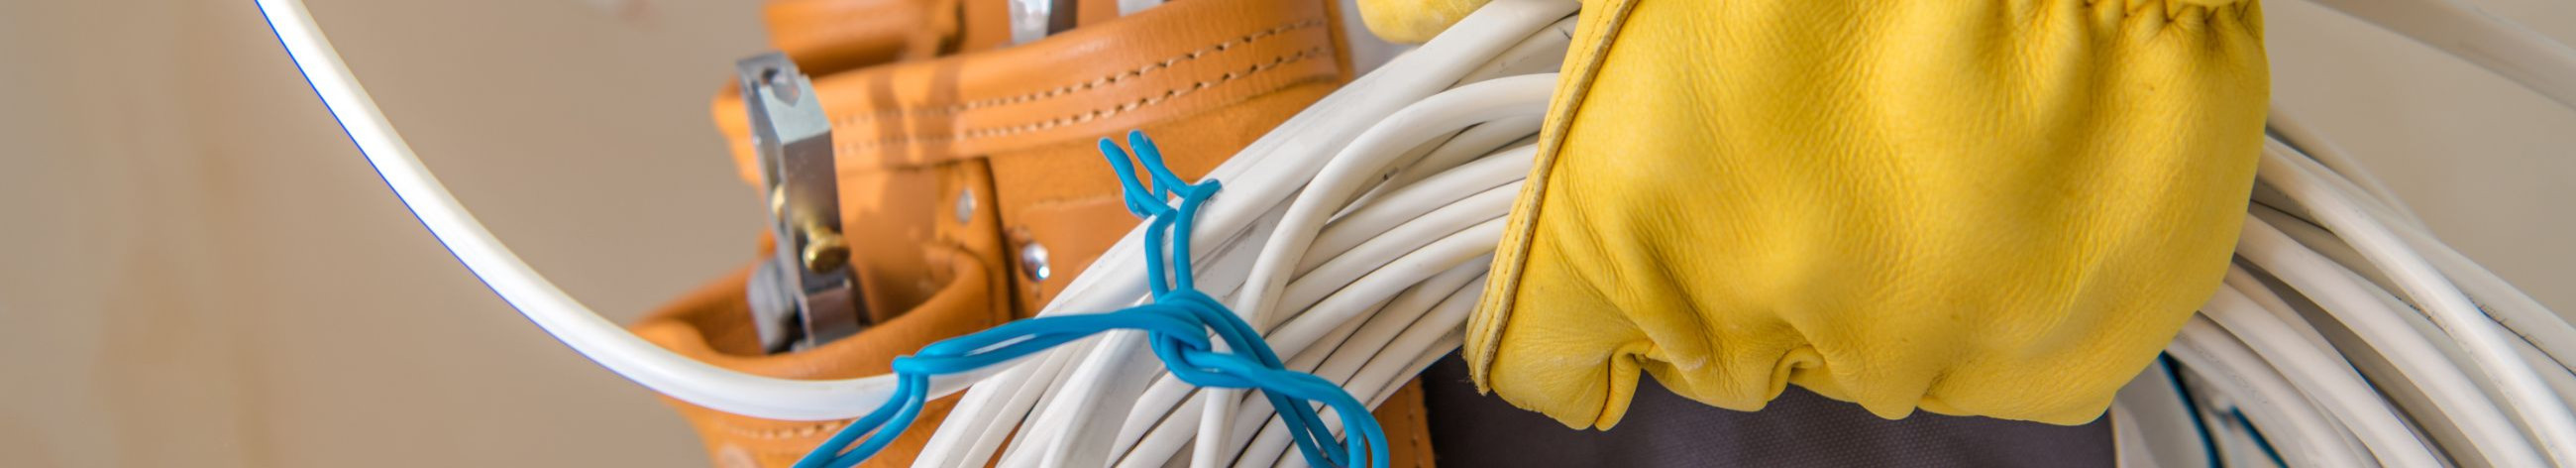 We provide comprehensive electrical services from design to maintenance.